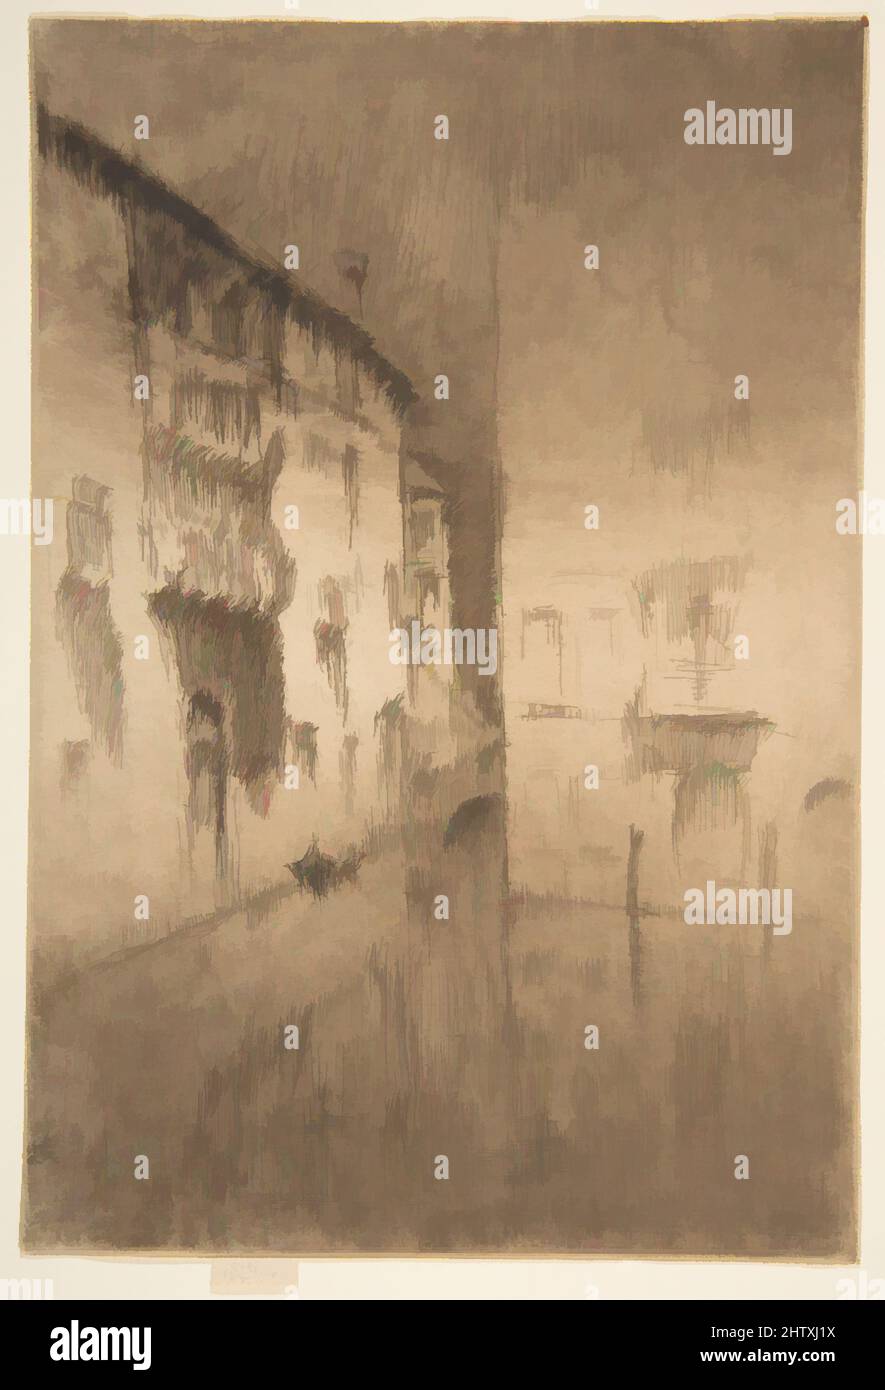 Art inspired by Nocturne: Palaces, 1879–80, Etching and drypoint; tenth state of twelve (Glasgow); printed in brownish-black ink on ivory laid paper, Plate: 11 3/4 × 7 15/16 in. (29.8 × 20.2 cm), Prints, James McNeill Whistler (American, Lowell, Massachusetts 1834–1903 London, Classic works modernized by Artotop with a splash of modernity. Shapes, color and value, eye-catching visual impact on art. Emotions through freedom of artworks in a contemporary way. A timeless message pursuing a wildly creative new direction. Artists turning to the digital medium and creating the Artotop NFT Stock Photo